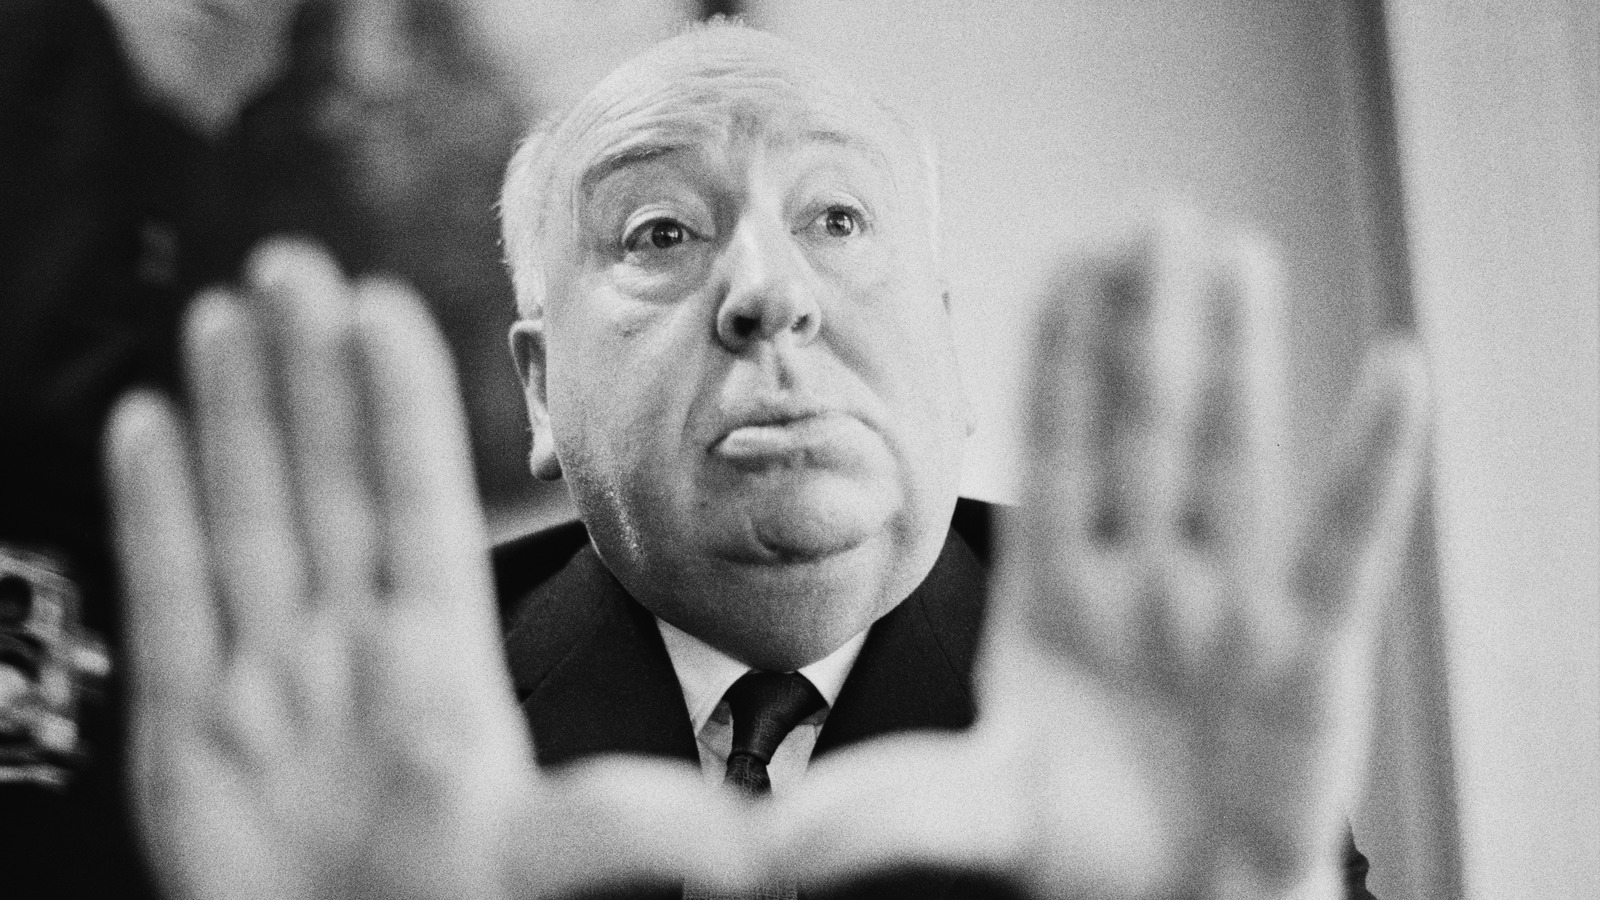 Alfred Hitchcock learned the hard way that leading cats was not one of his talents